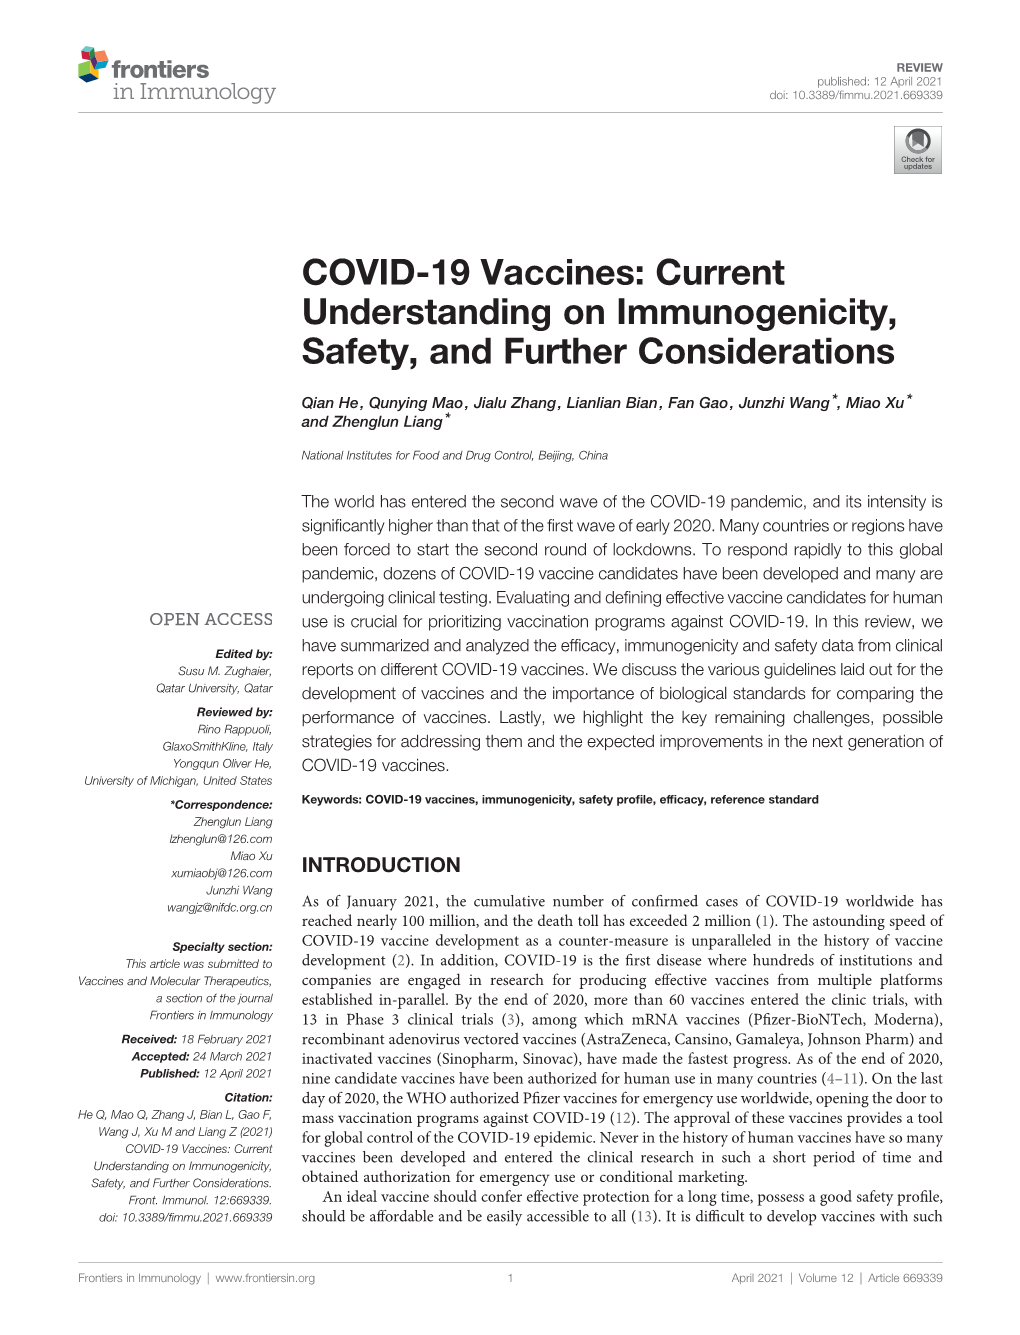 COVID-19 Vaccines: Current Understanding on Immunogenicity, Safety, and Further Considerations